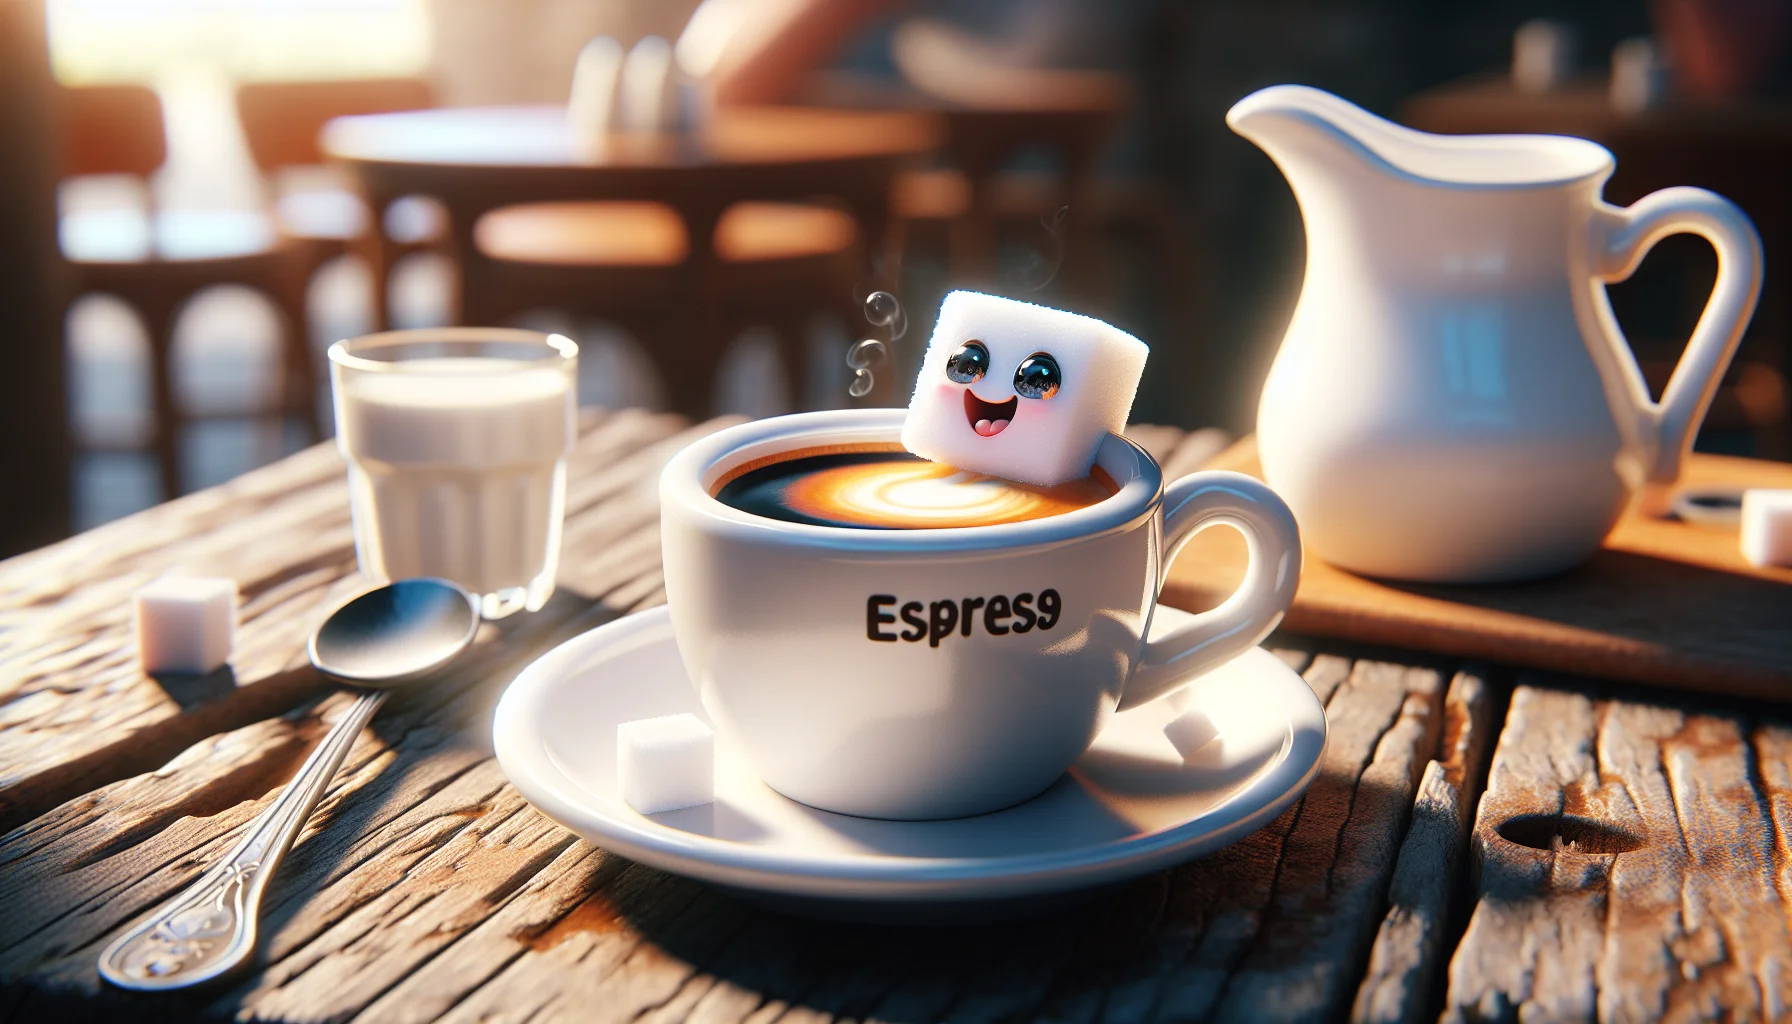 Create a highly detailed and realistic image of a small, white ceramic cup brimming with doppio espresso. The cup rests on an antique wooden table against a sunny Italian café backdrop. A tiny, anthropomorphic sugar cube with big, twinkling eyes is poised on the edge of the cup, giggling as it prepares to jump into the espresso. On the side, a chilled milk jug gazes on with an envious expression. The scene should emanate an overwhelmingly joyful and enticing aura, urging viewers to sit back and enjoy their own cup of espresso.